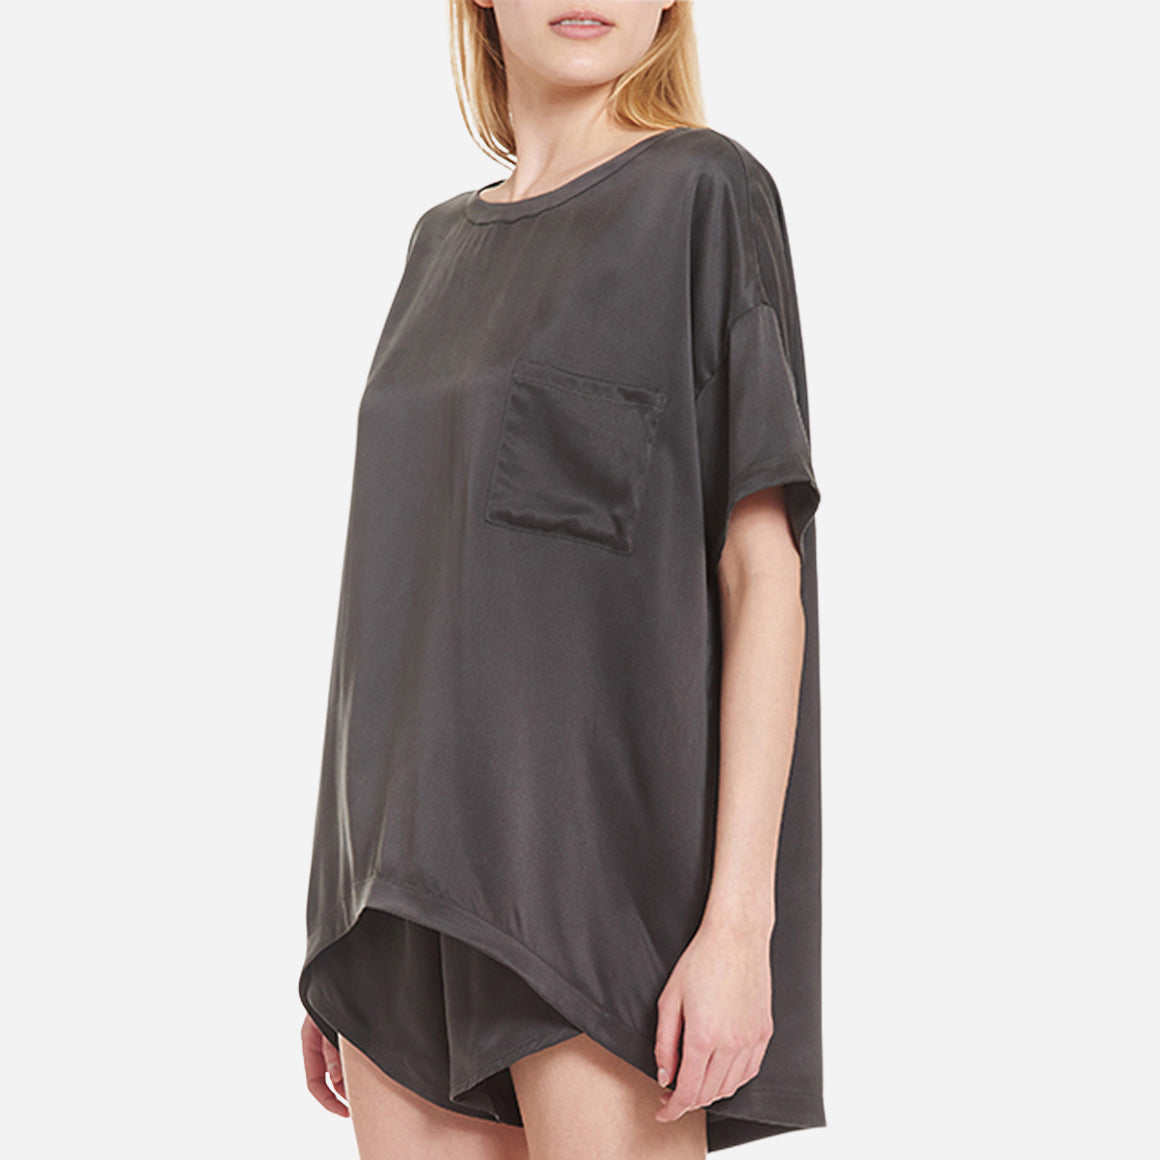 The set includes a short-sleeved tee and relaxed-fit shorts, both crafted from breathable silk fabric that is lightweight, comfortable, and machine washable. The shorts feature an elastic waistband for a perfect fit, while the tee is designed with a flattering neckline, chest pocket, and relaxed fit that drapes beautifully on the body.